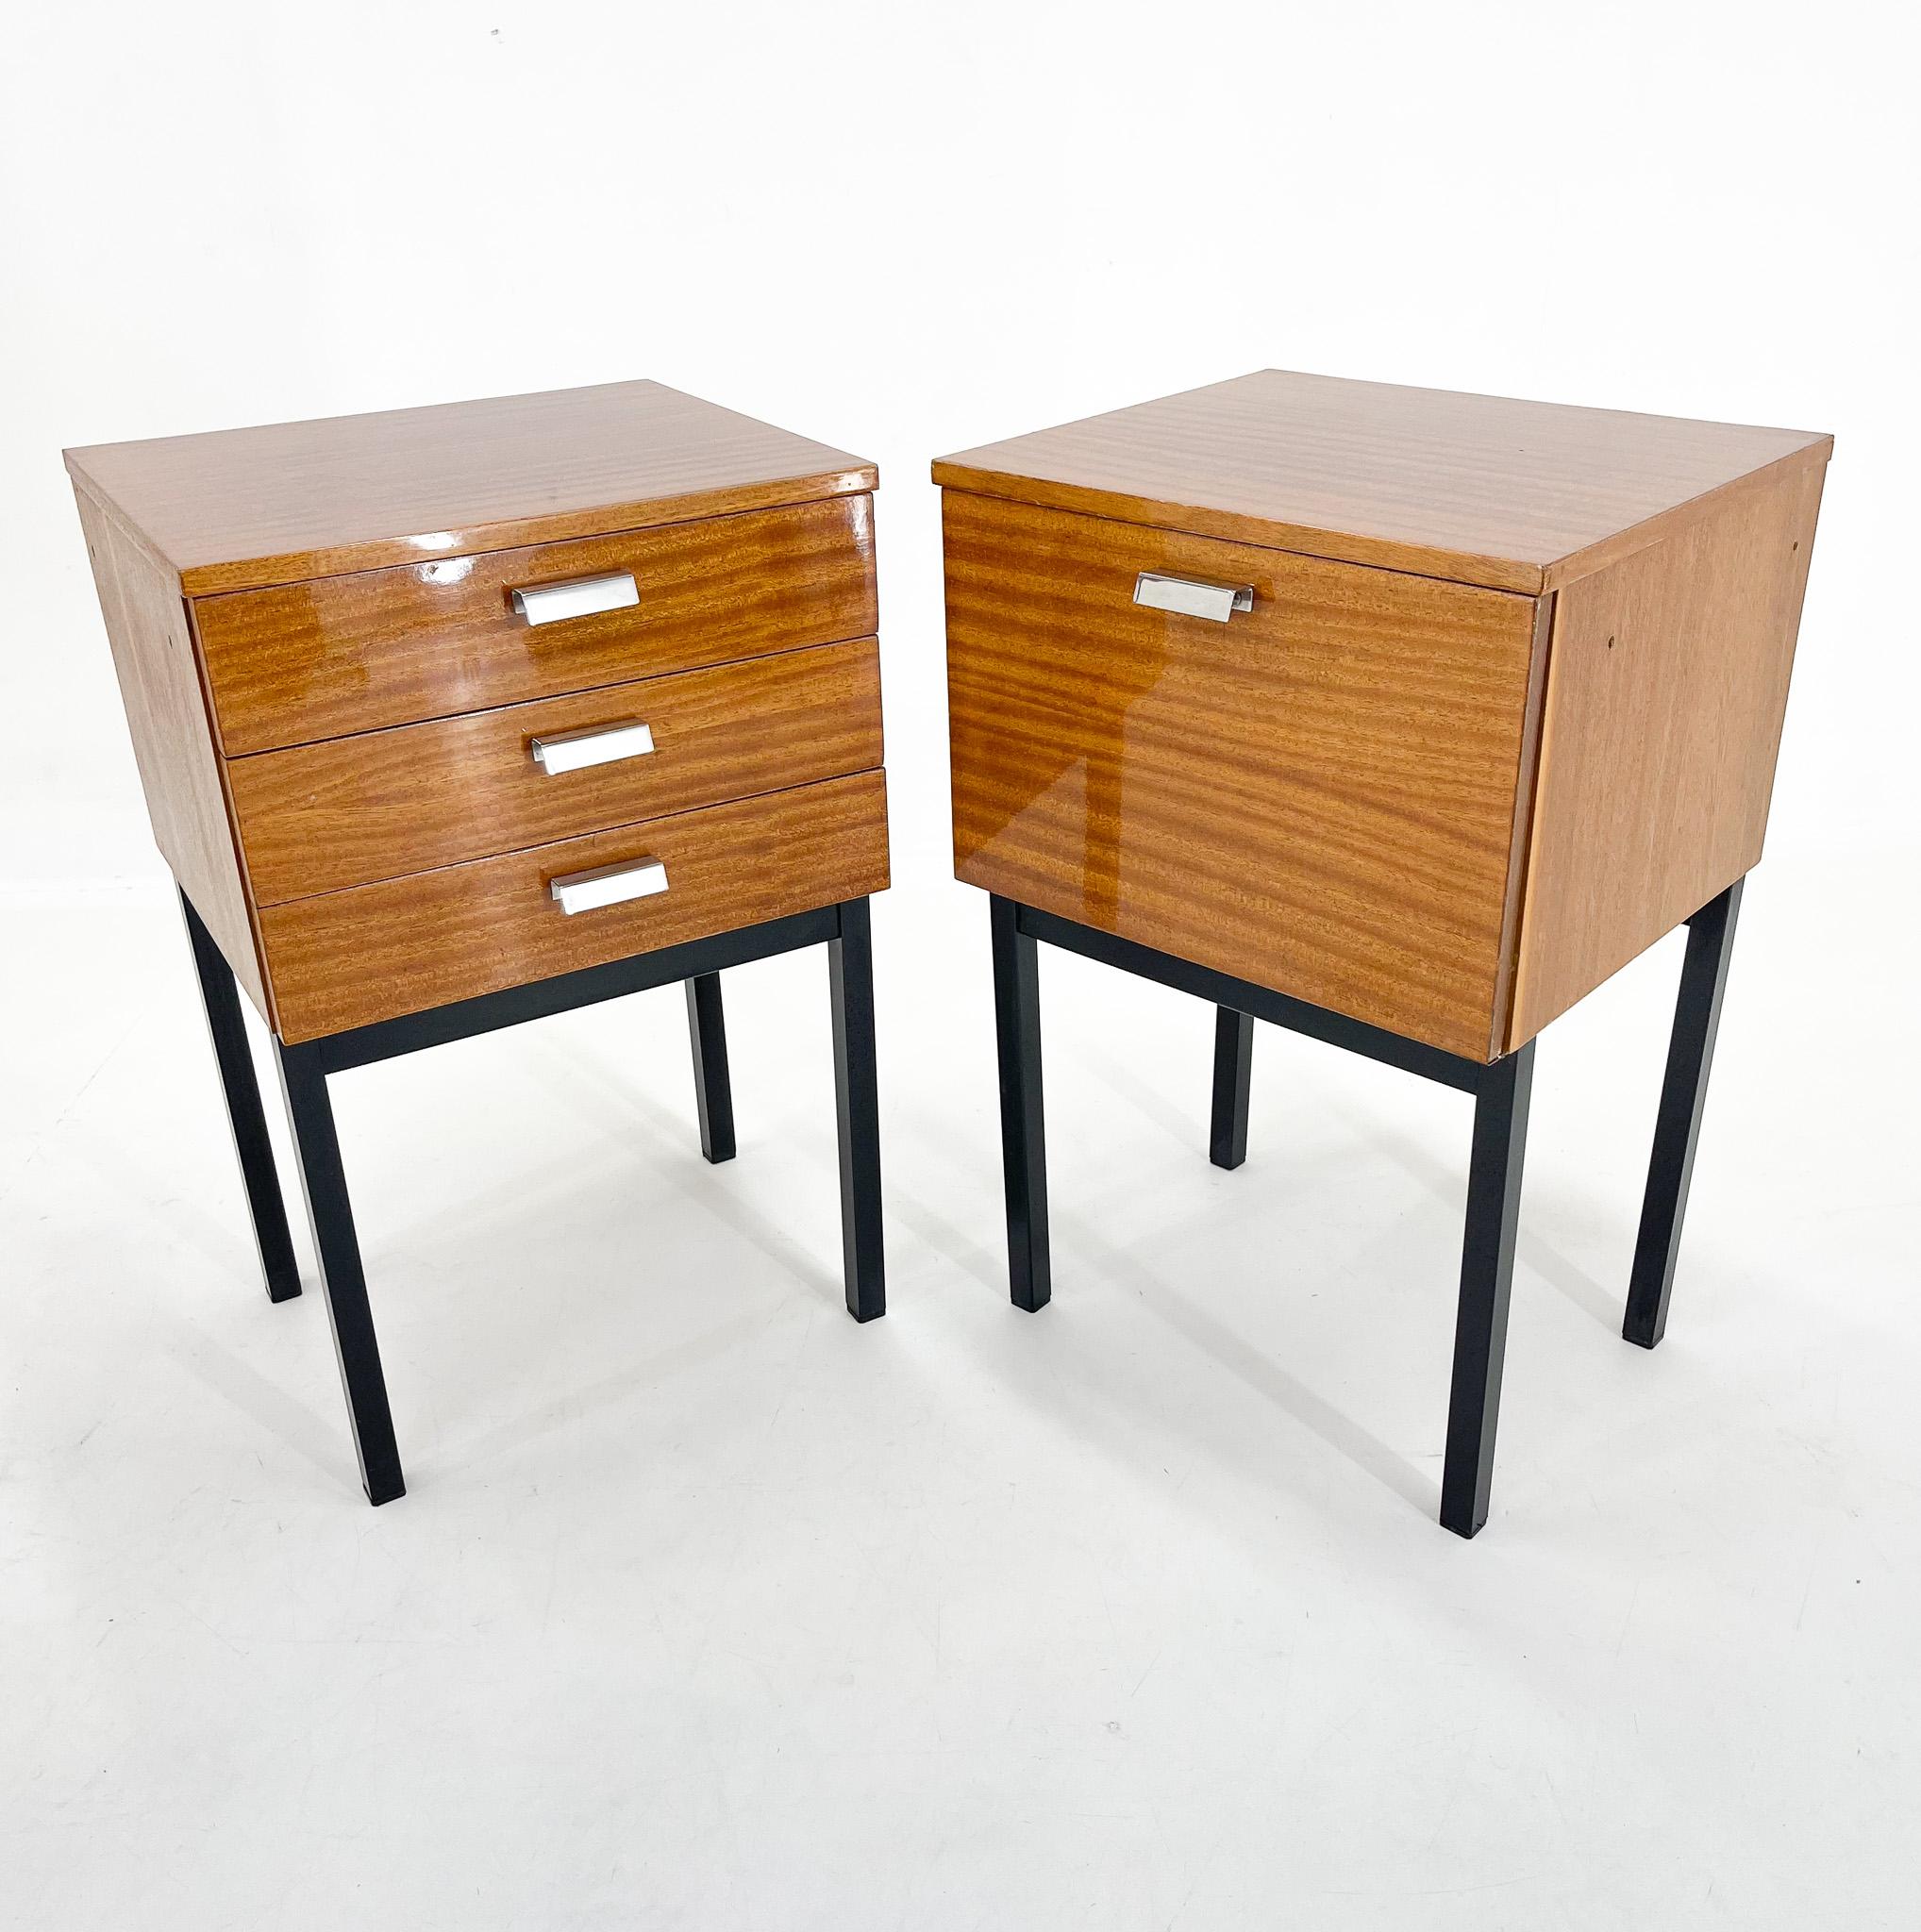 20th Century Midcentury Bedside Tables or Side Tables in High Gloss, Czechoslovakia